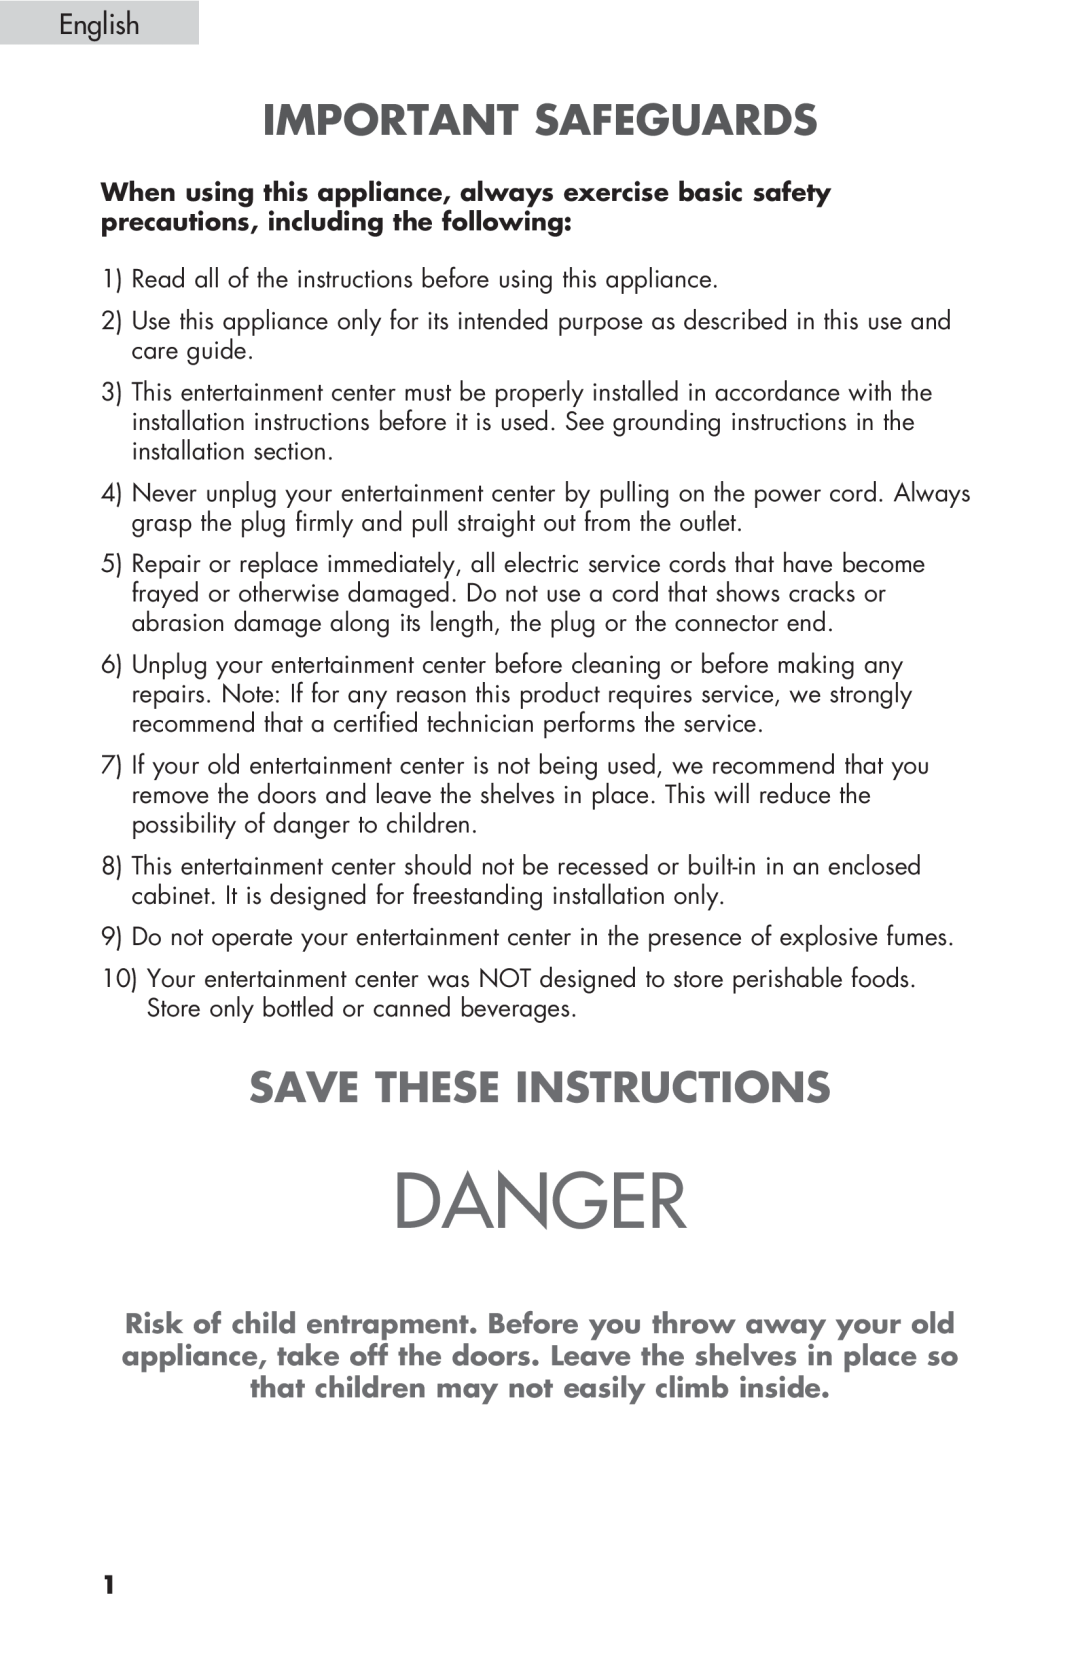 Haier HBCN05FVS user manual Danger, Important Safeguards, Save These Instructions, English 